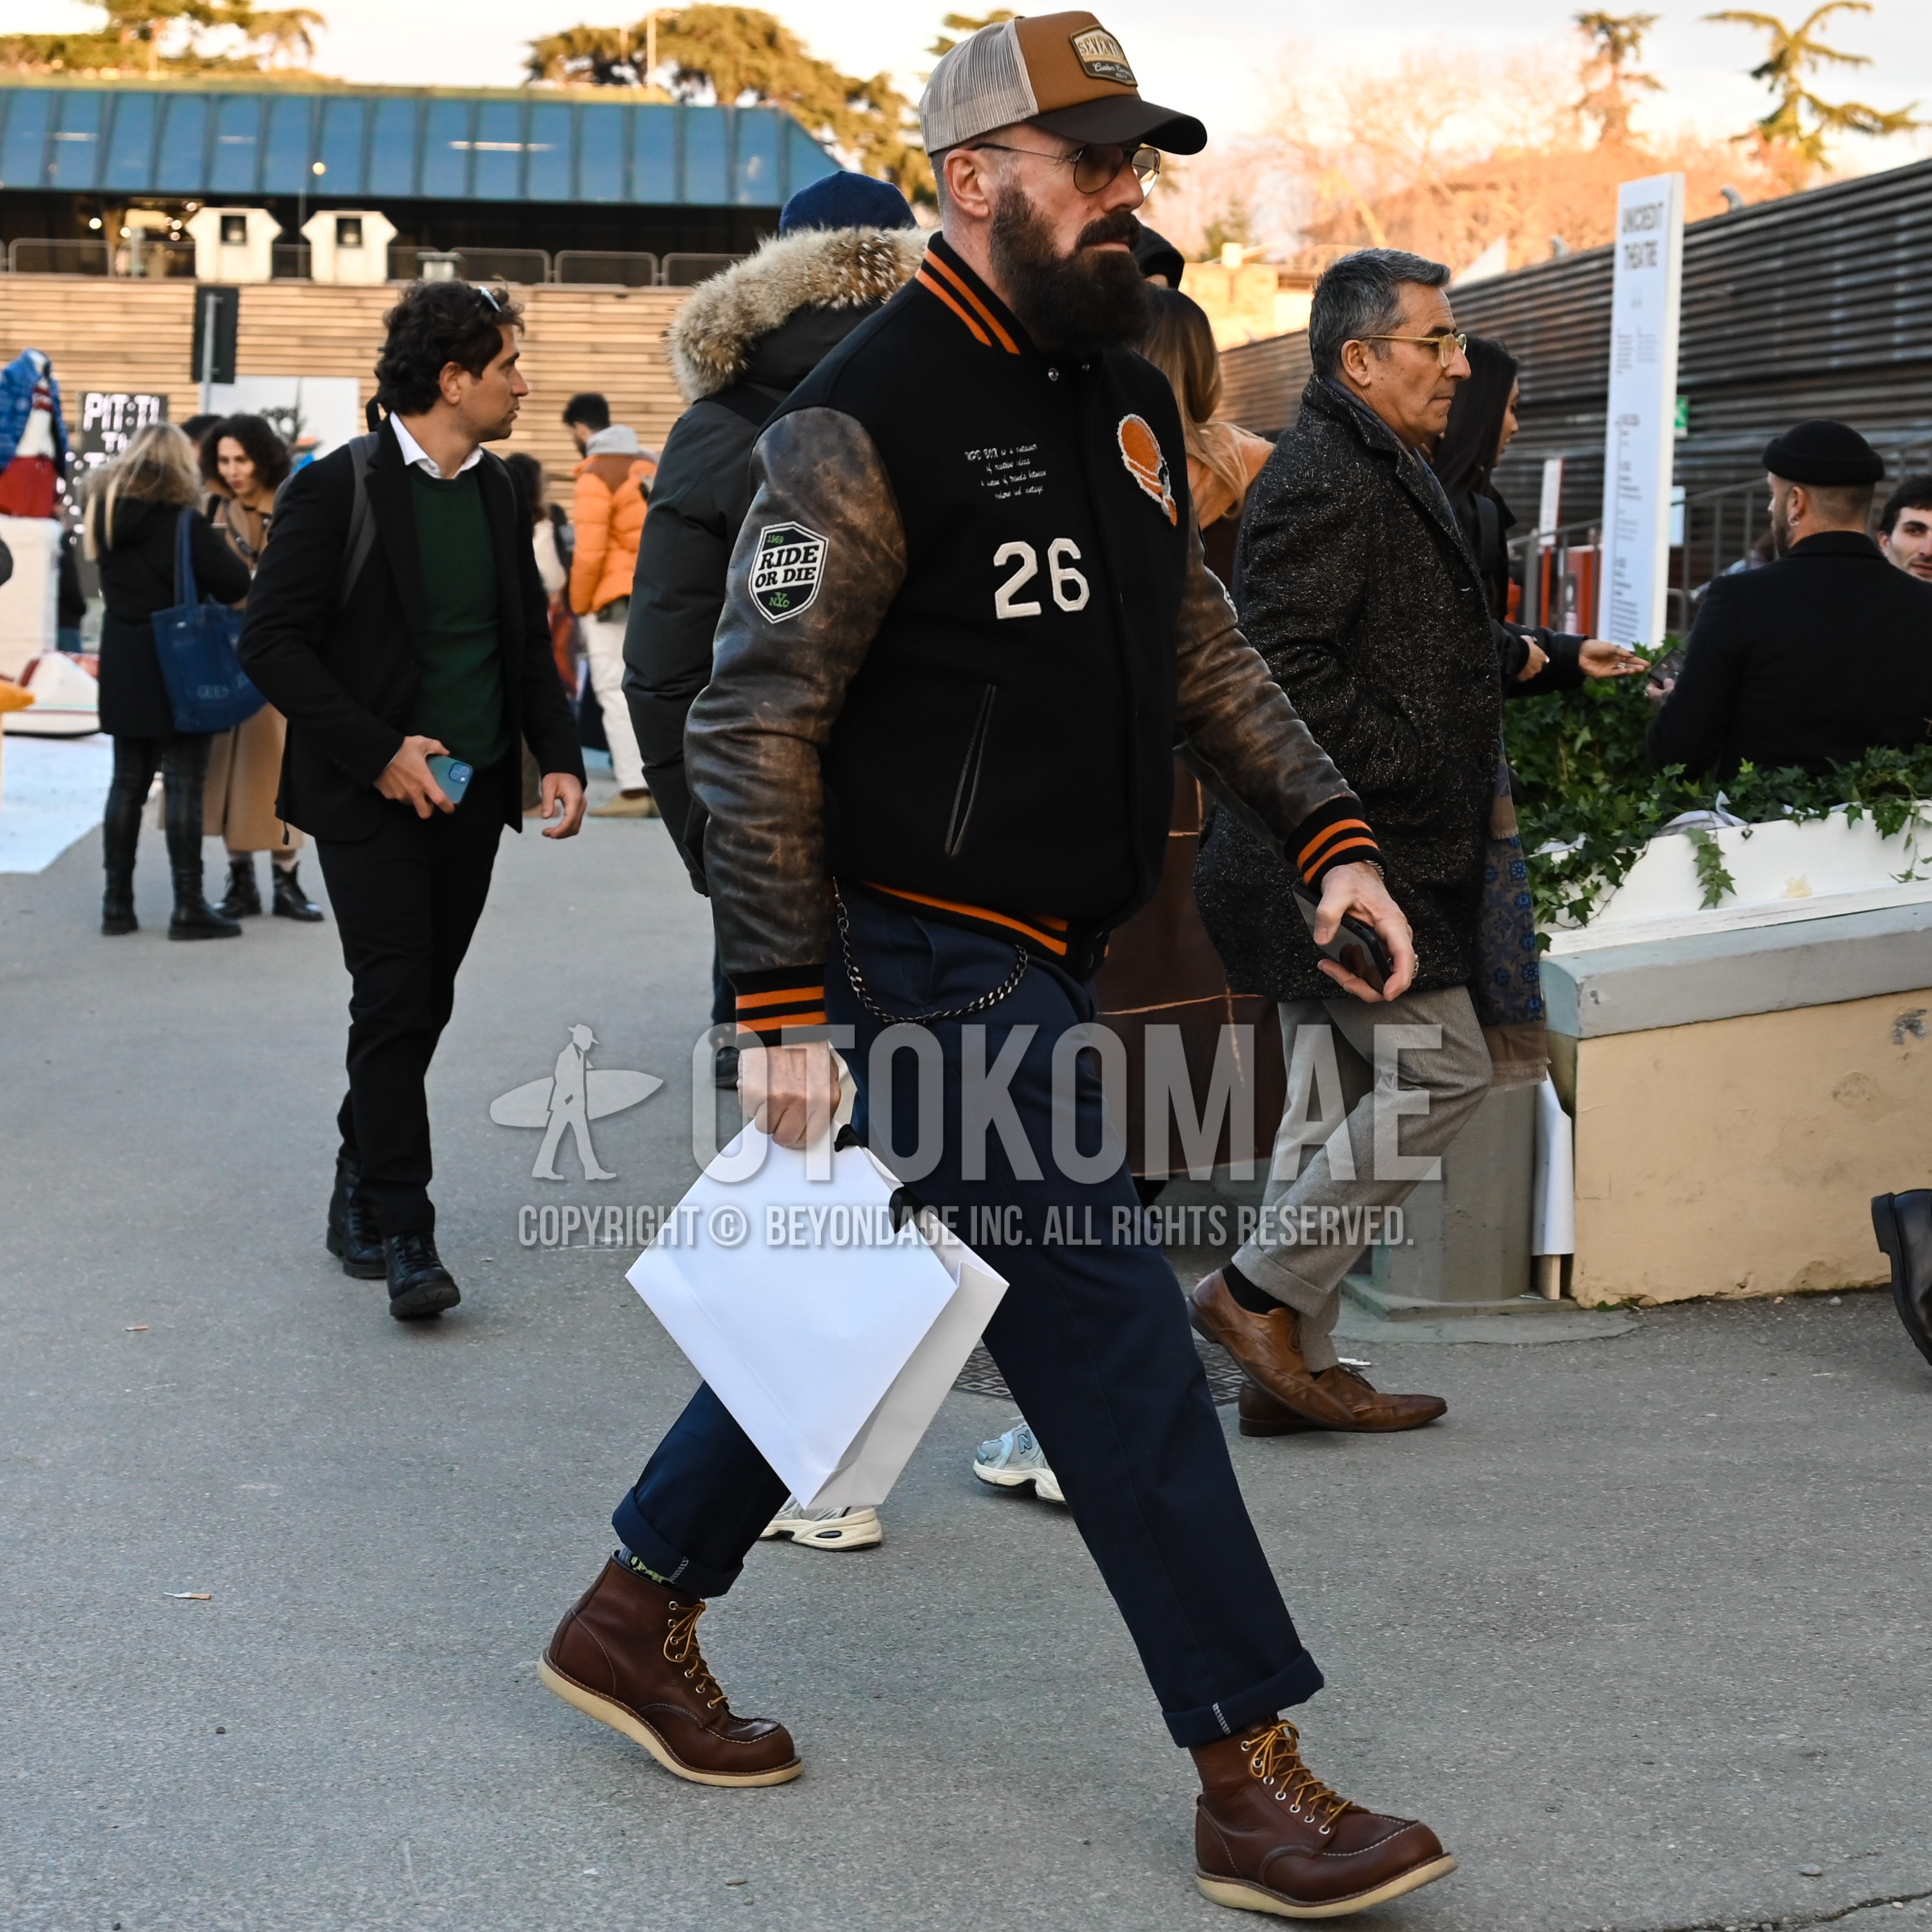 Men's autumn winter outfit with multi-color brown one point baseball cap, silver plain glasses, multi-color outerwear stadium jacket, navy plain ankle pants, brown work boots.